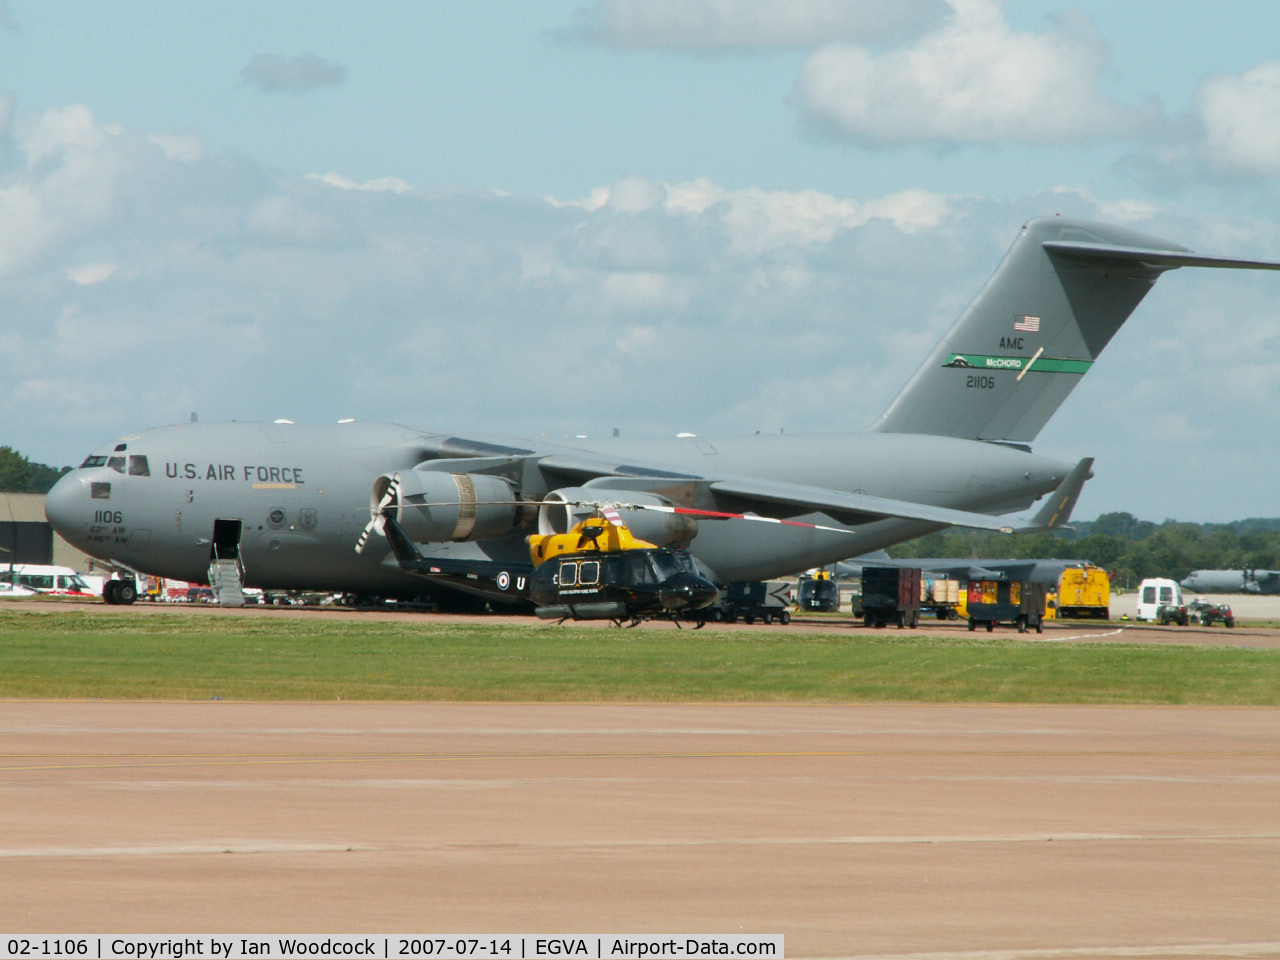 02-1106, 2002 Boeing C-17A Globemaster III C/N P-106, C-17A/7 AS-62 AW USAF/RIAT Fairford (ZJ240 Griffin in foreground)